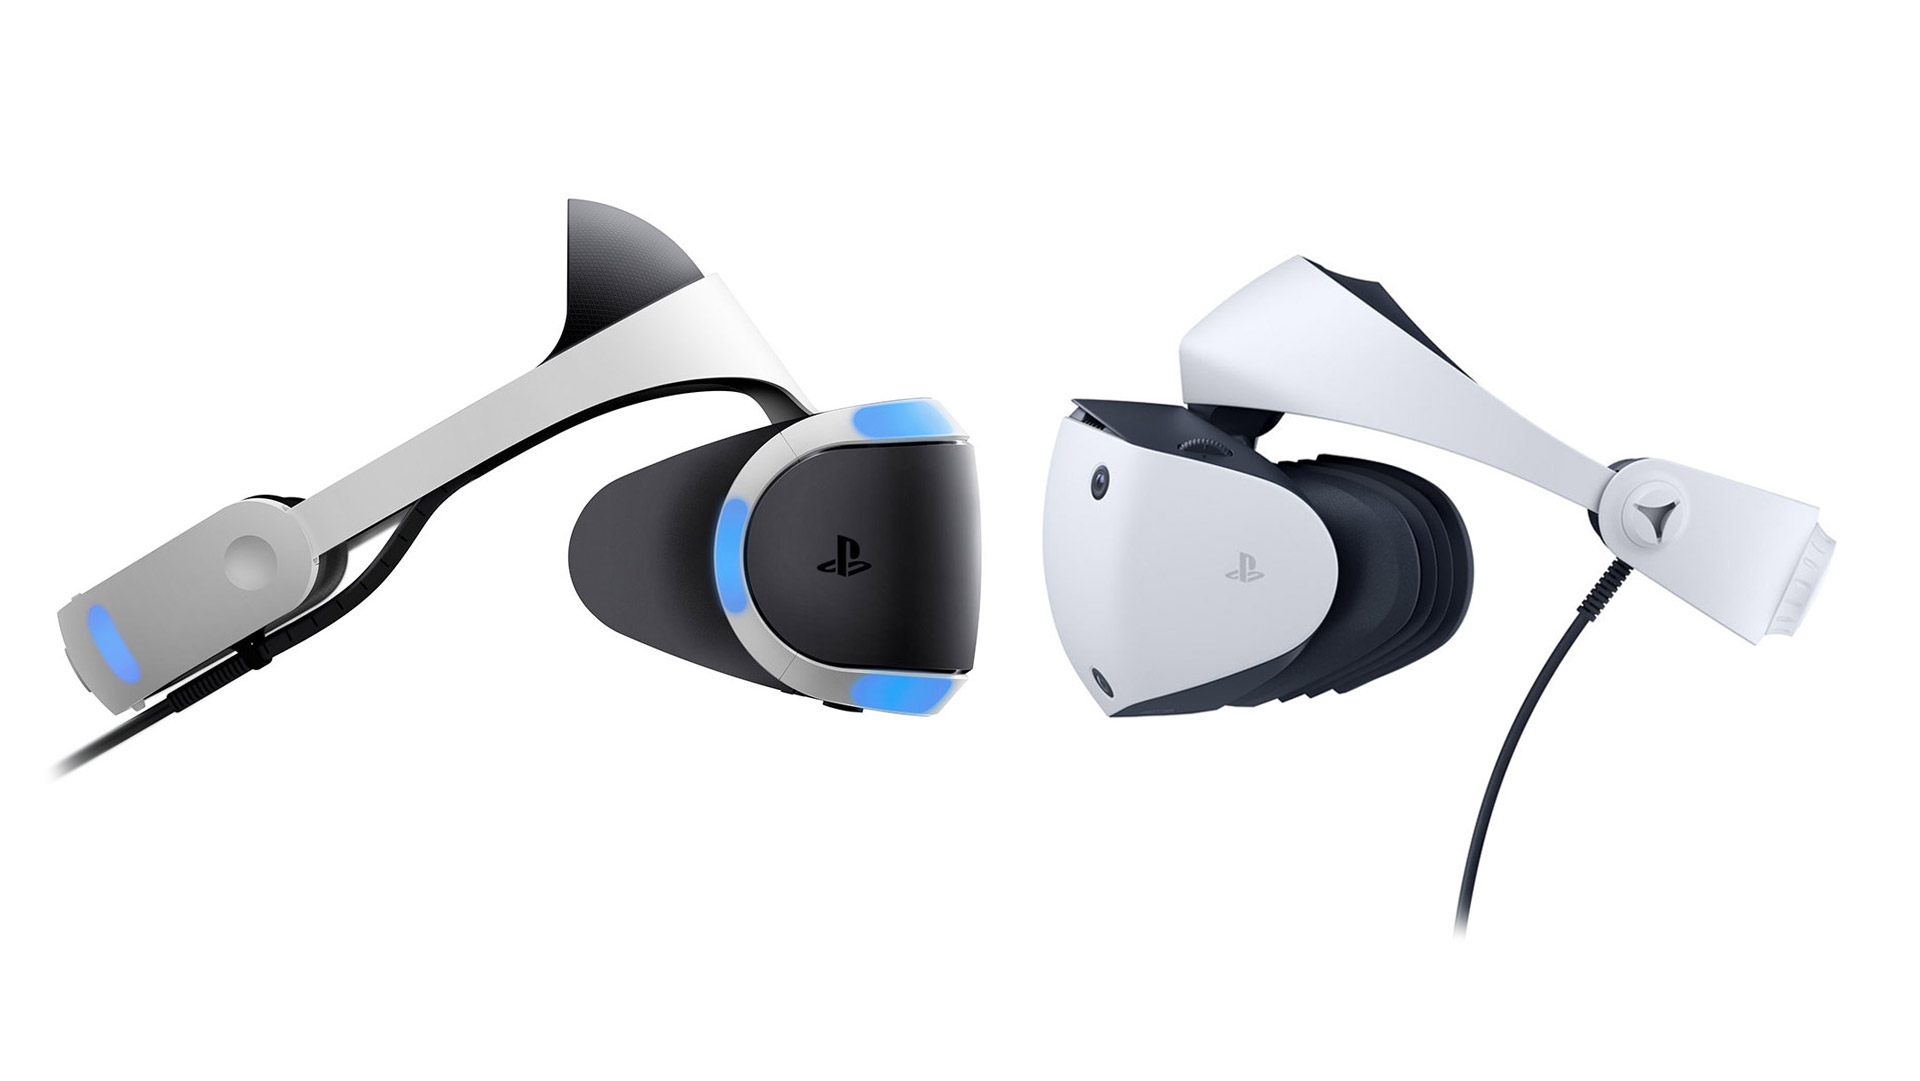 PSVR 2 Outsold Original PSVR in First 6 Weeks, Sony Confirms – Road to VR